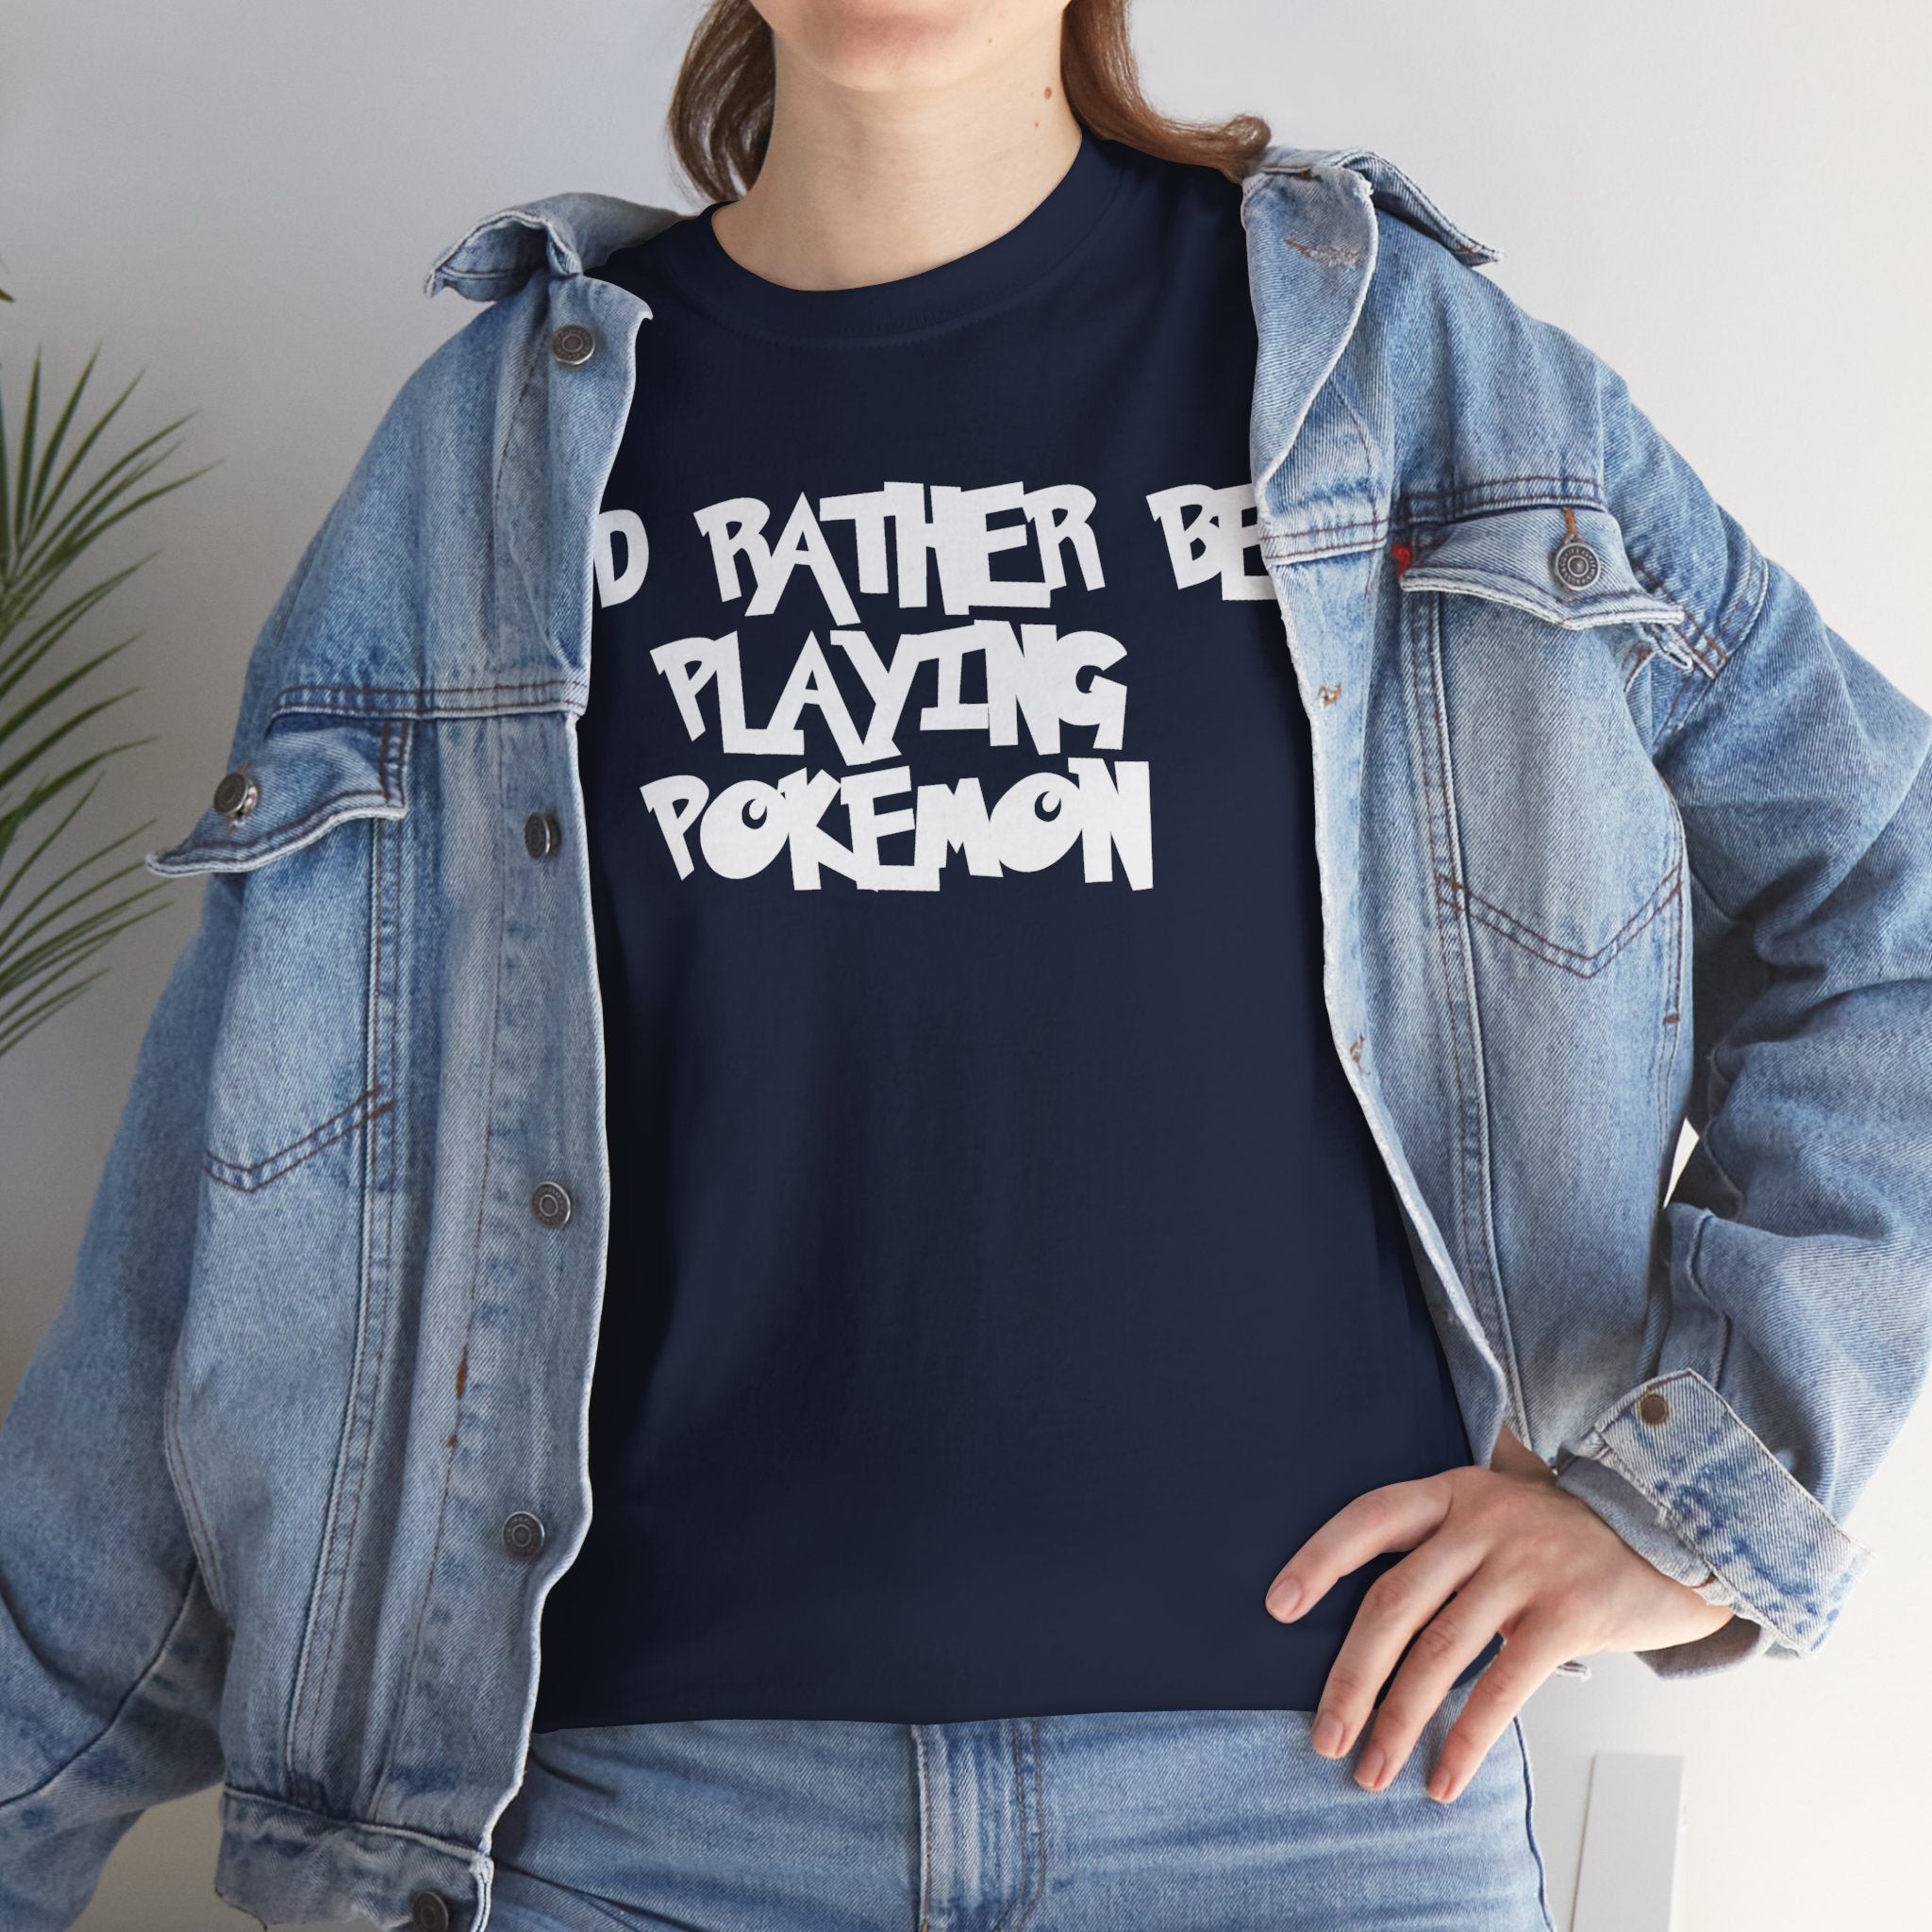 Poke mon I'd Rather Be Playing Unisex Heavy Cotton Tee Gamer Shirt Tshirt T-shirt Gamer Gift For Him Her Game Cup Cups Mugs Birthday Christmas Valentine's Anniversary Gifts